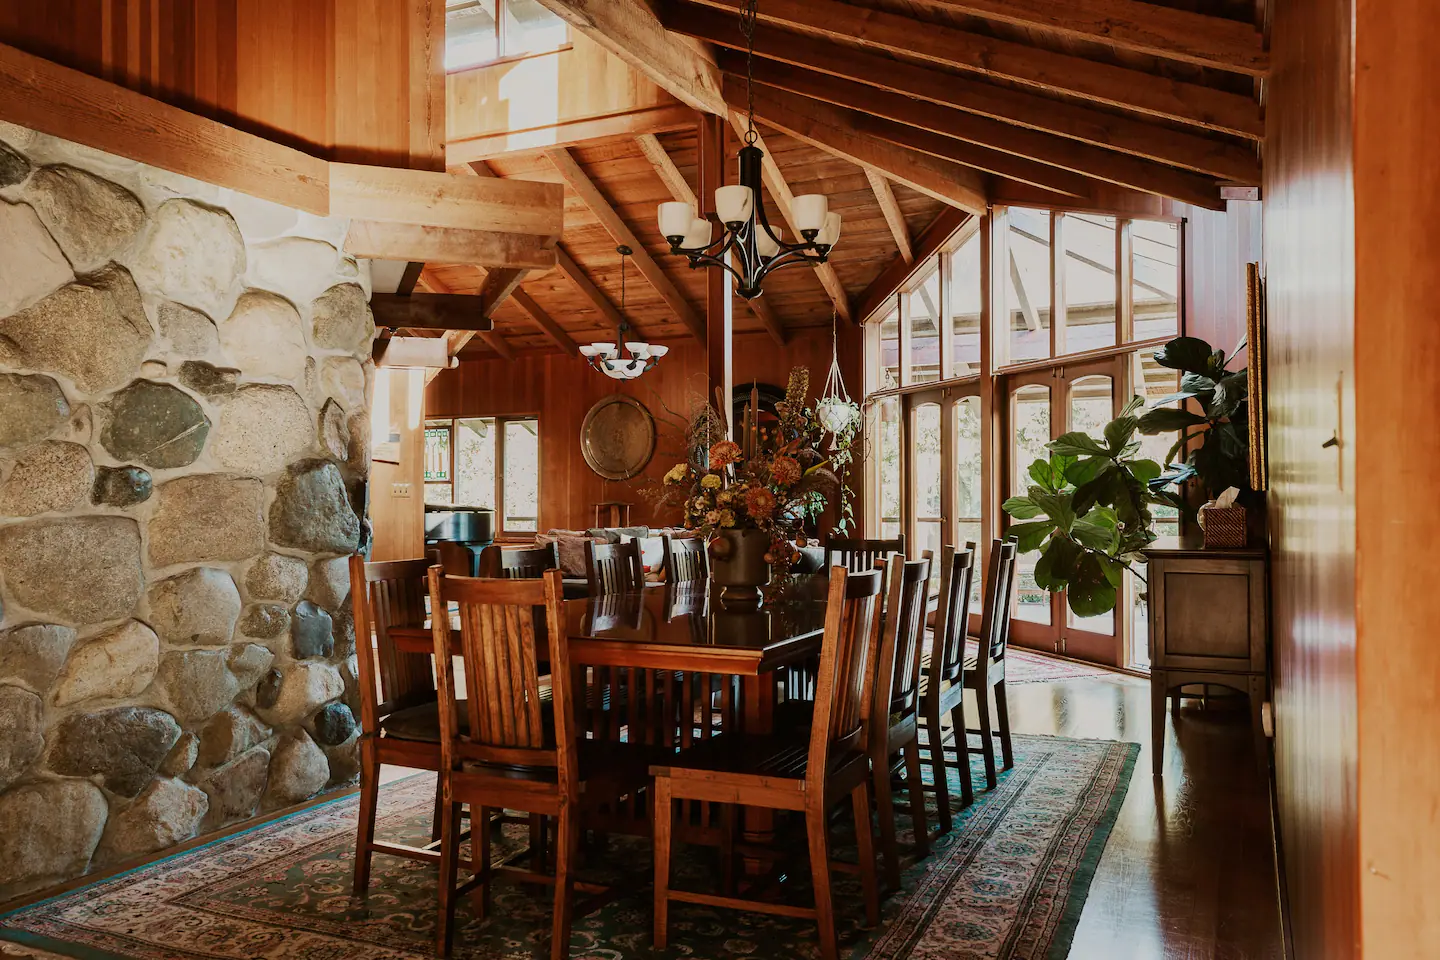 This cozy dining room is the perfect place to enjoy a family meal or a romantic dinner for two.